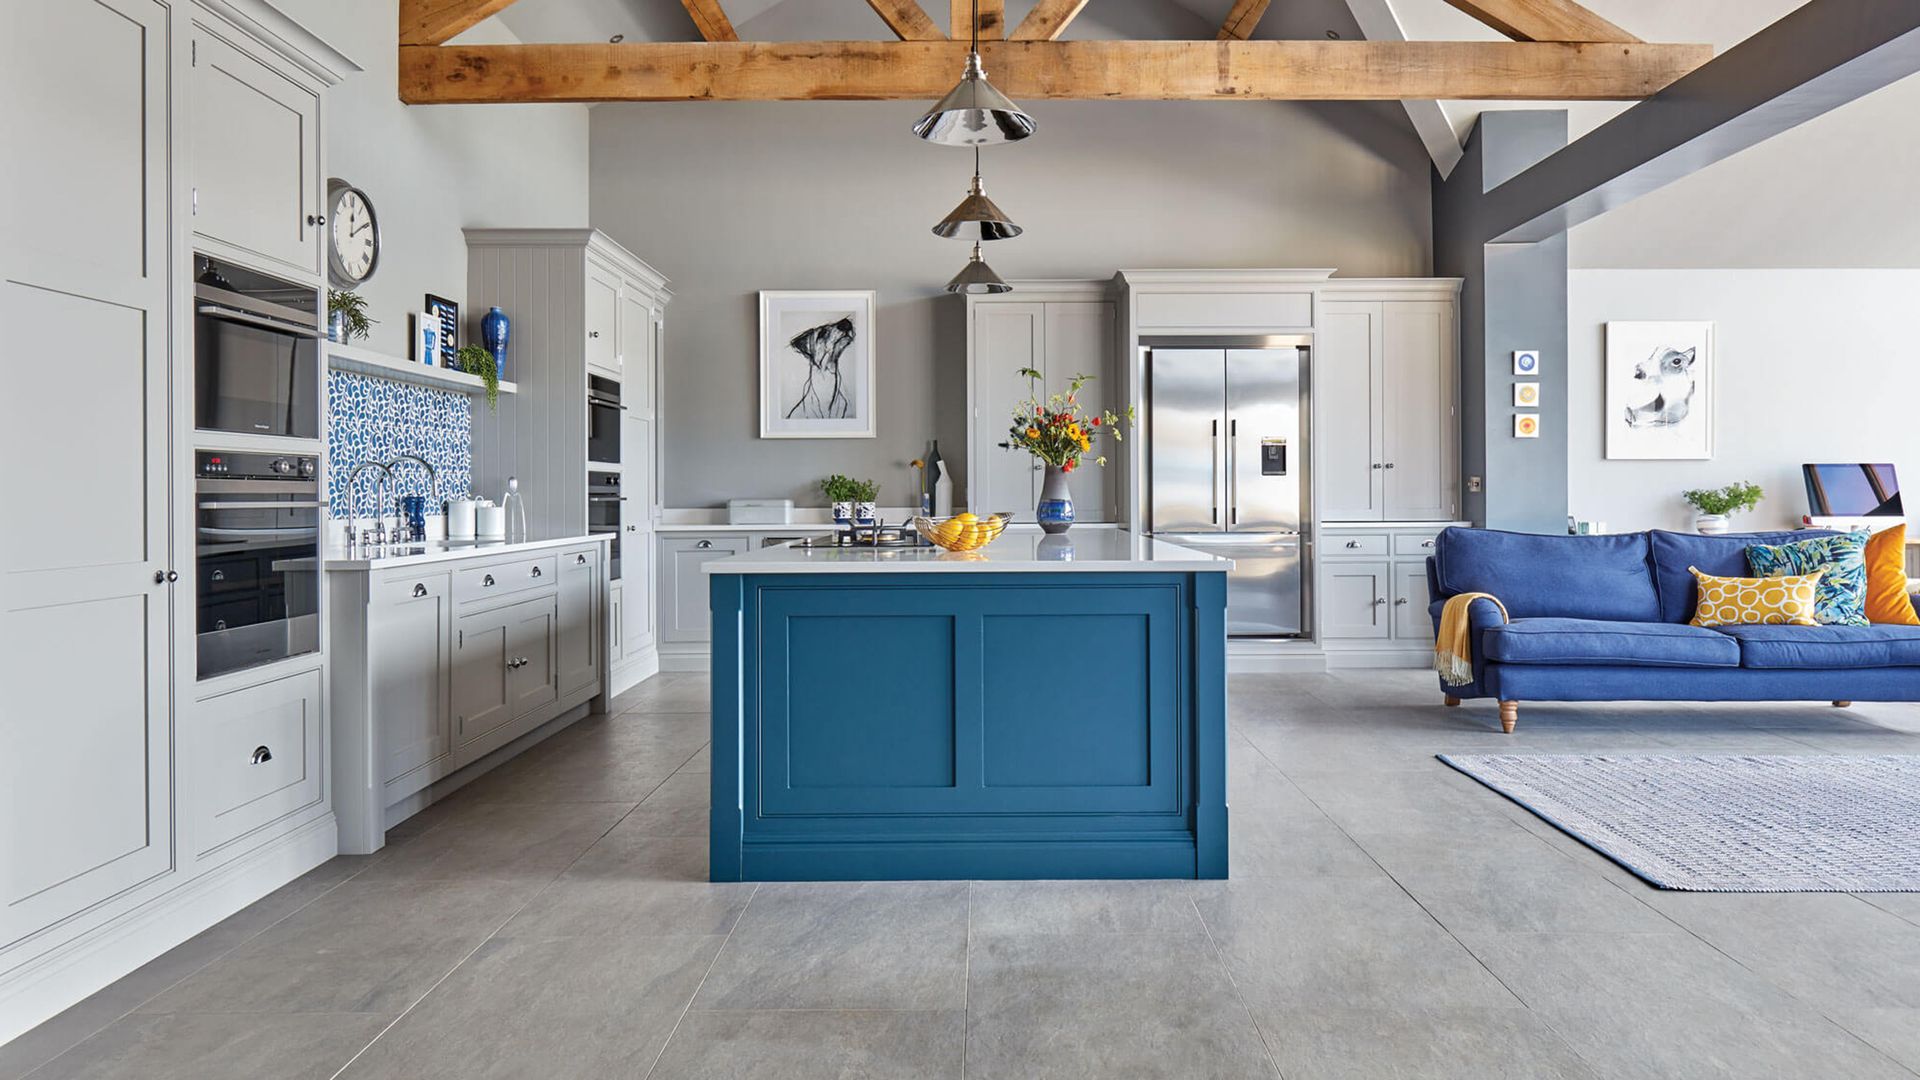 Blue kitchens 27 navy, cobalt, periwinkle and teal ideas Real Homes